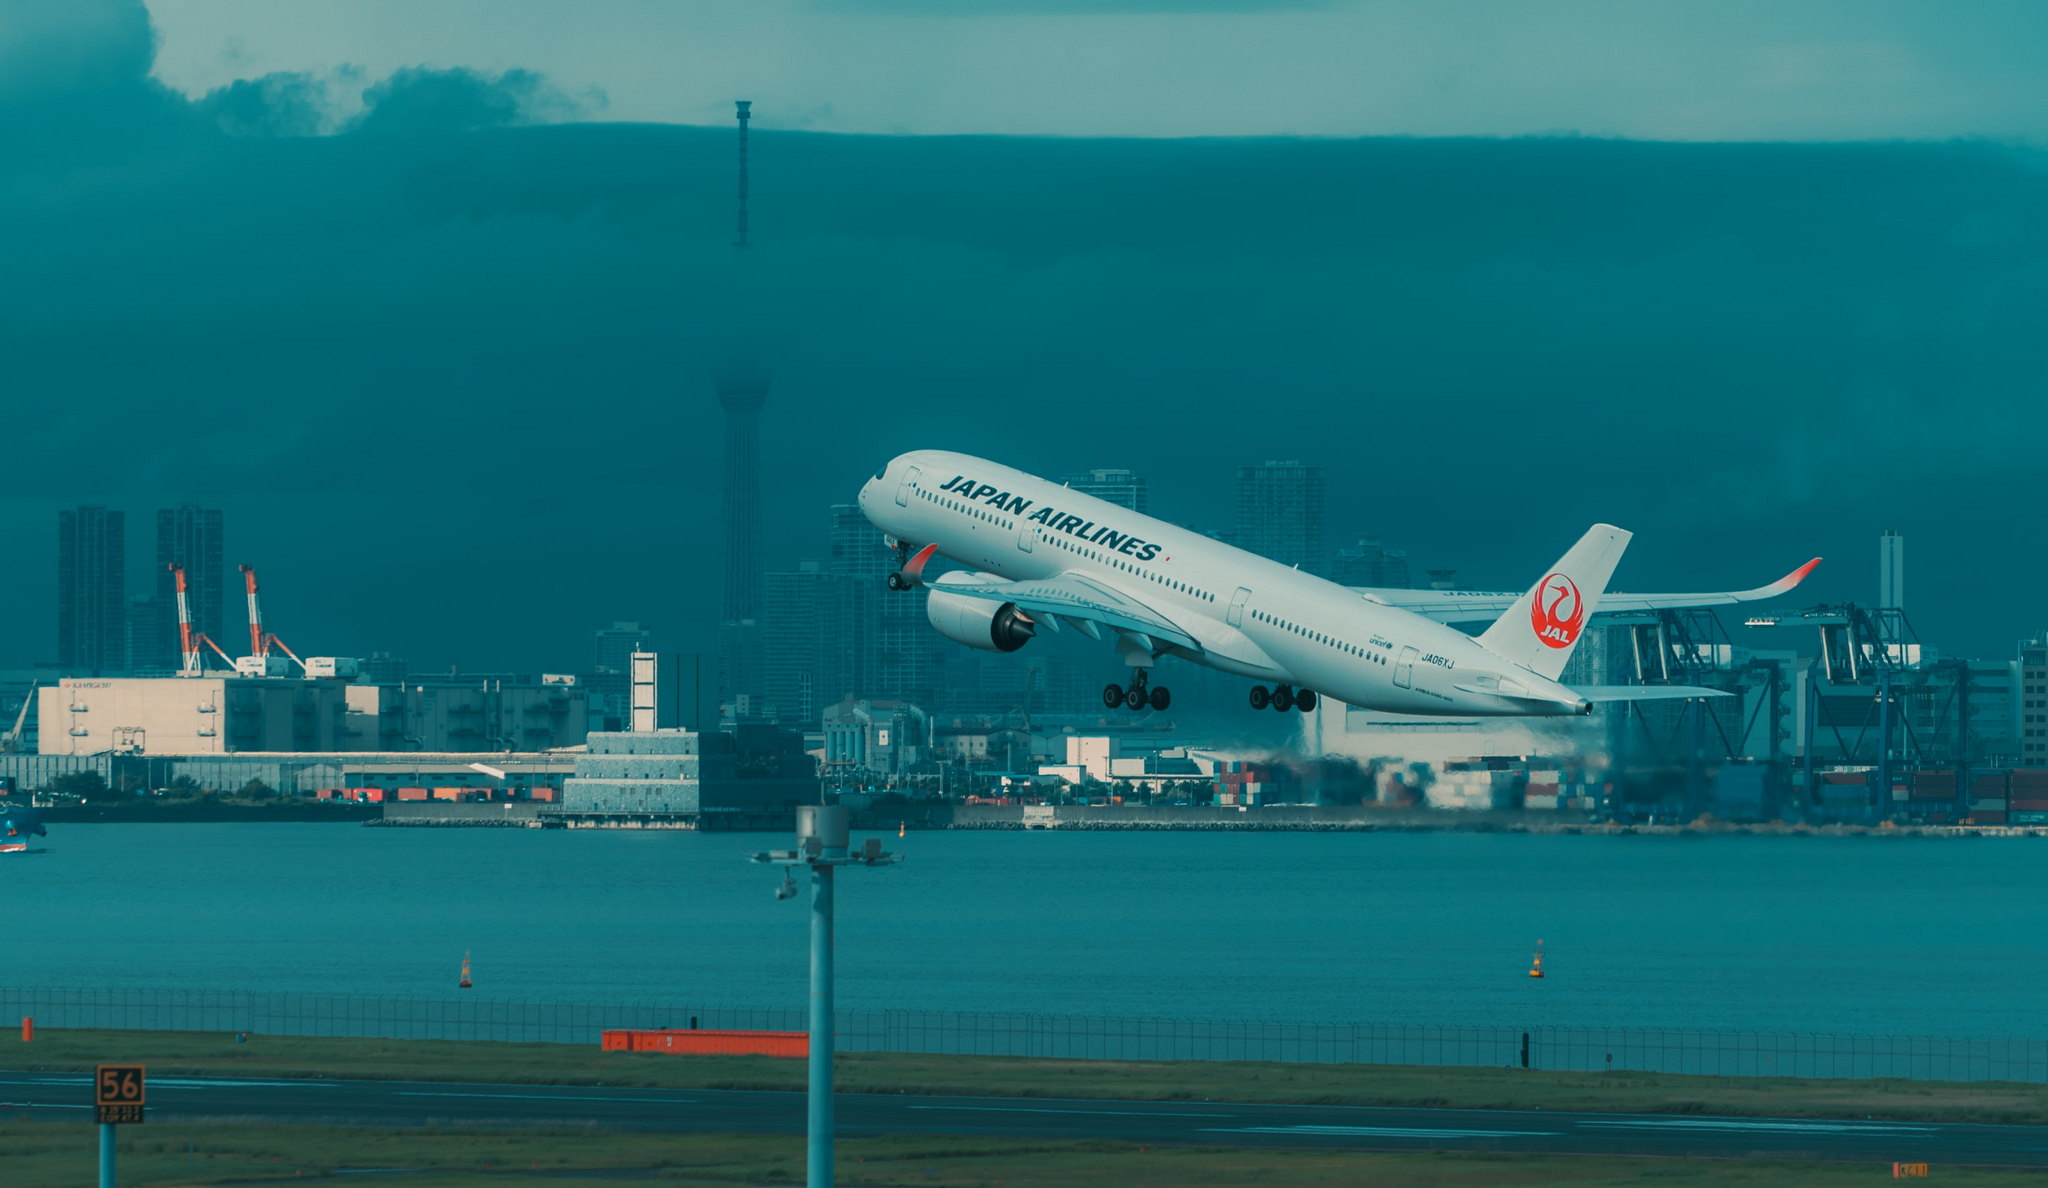 Japan Airlines taking off from Haneda Airport